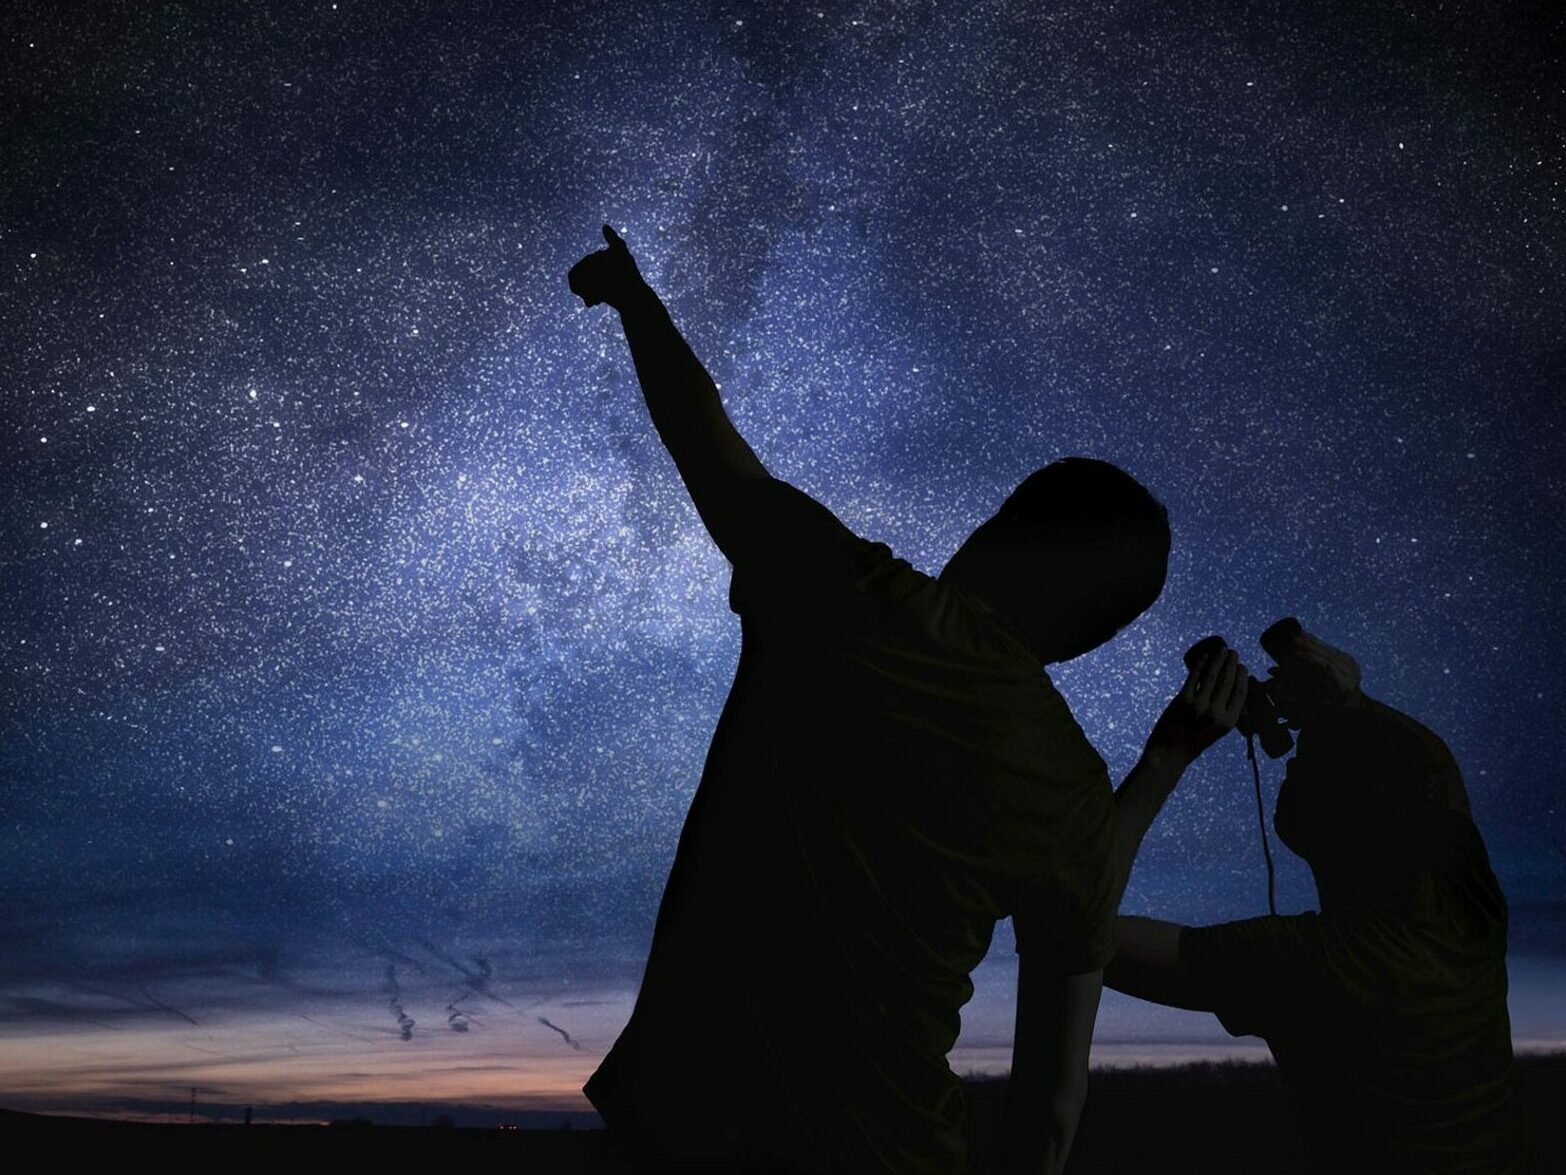 Silhouettes of an adult and child. The adult points up into the night sky full of stars, as the child looks up through binoculars.